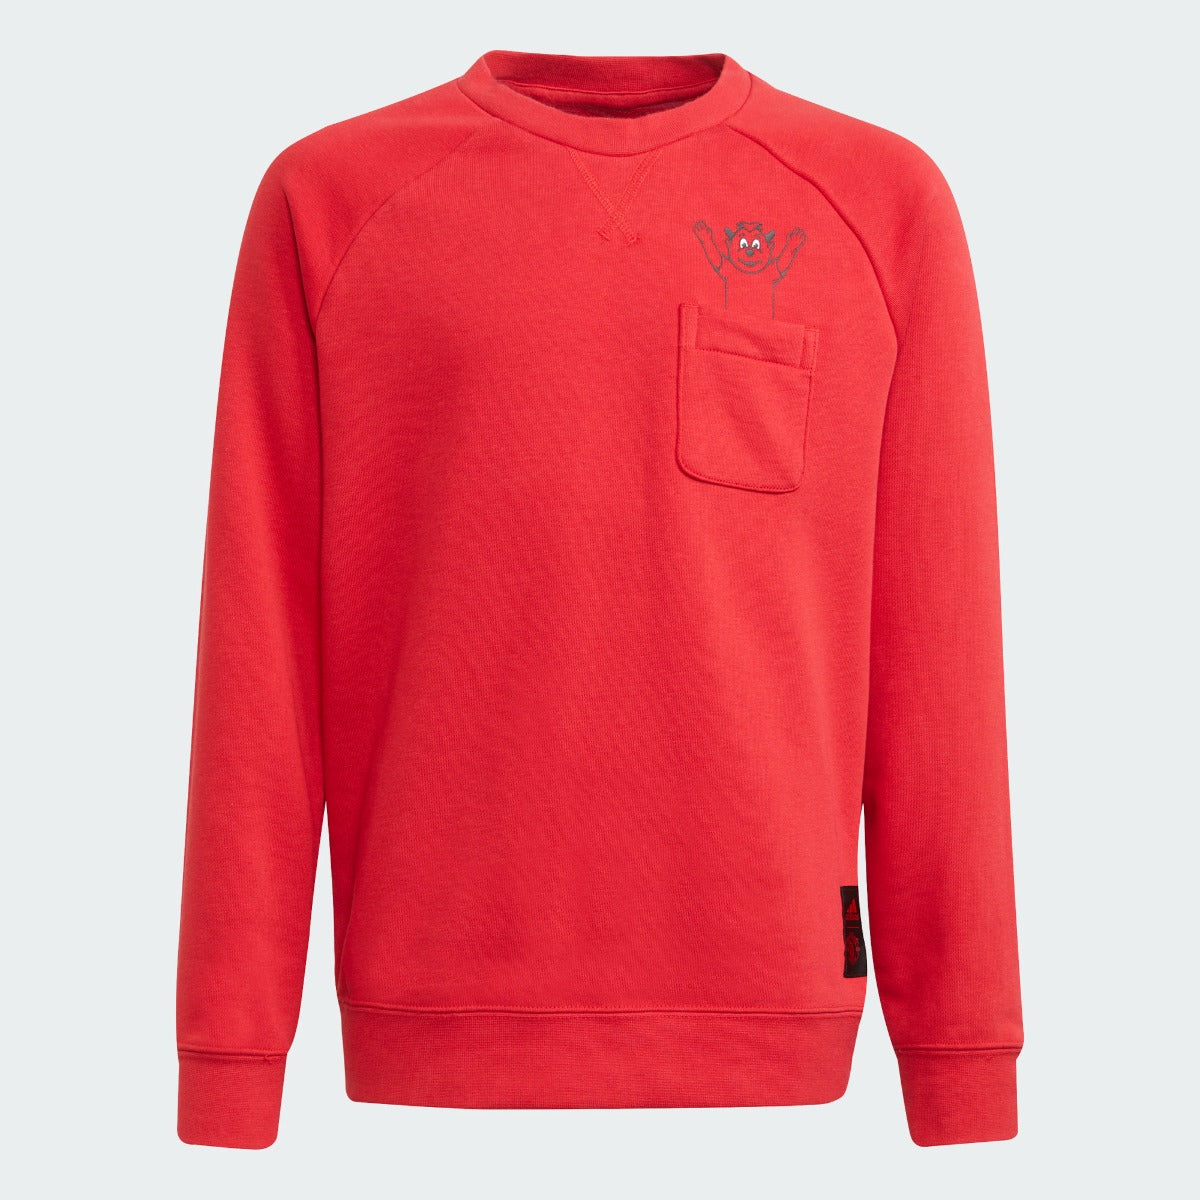 Adidas 2021-22 Manchester United Youth Crew Sweatshirt - Red (Front)